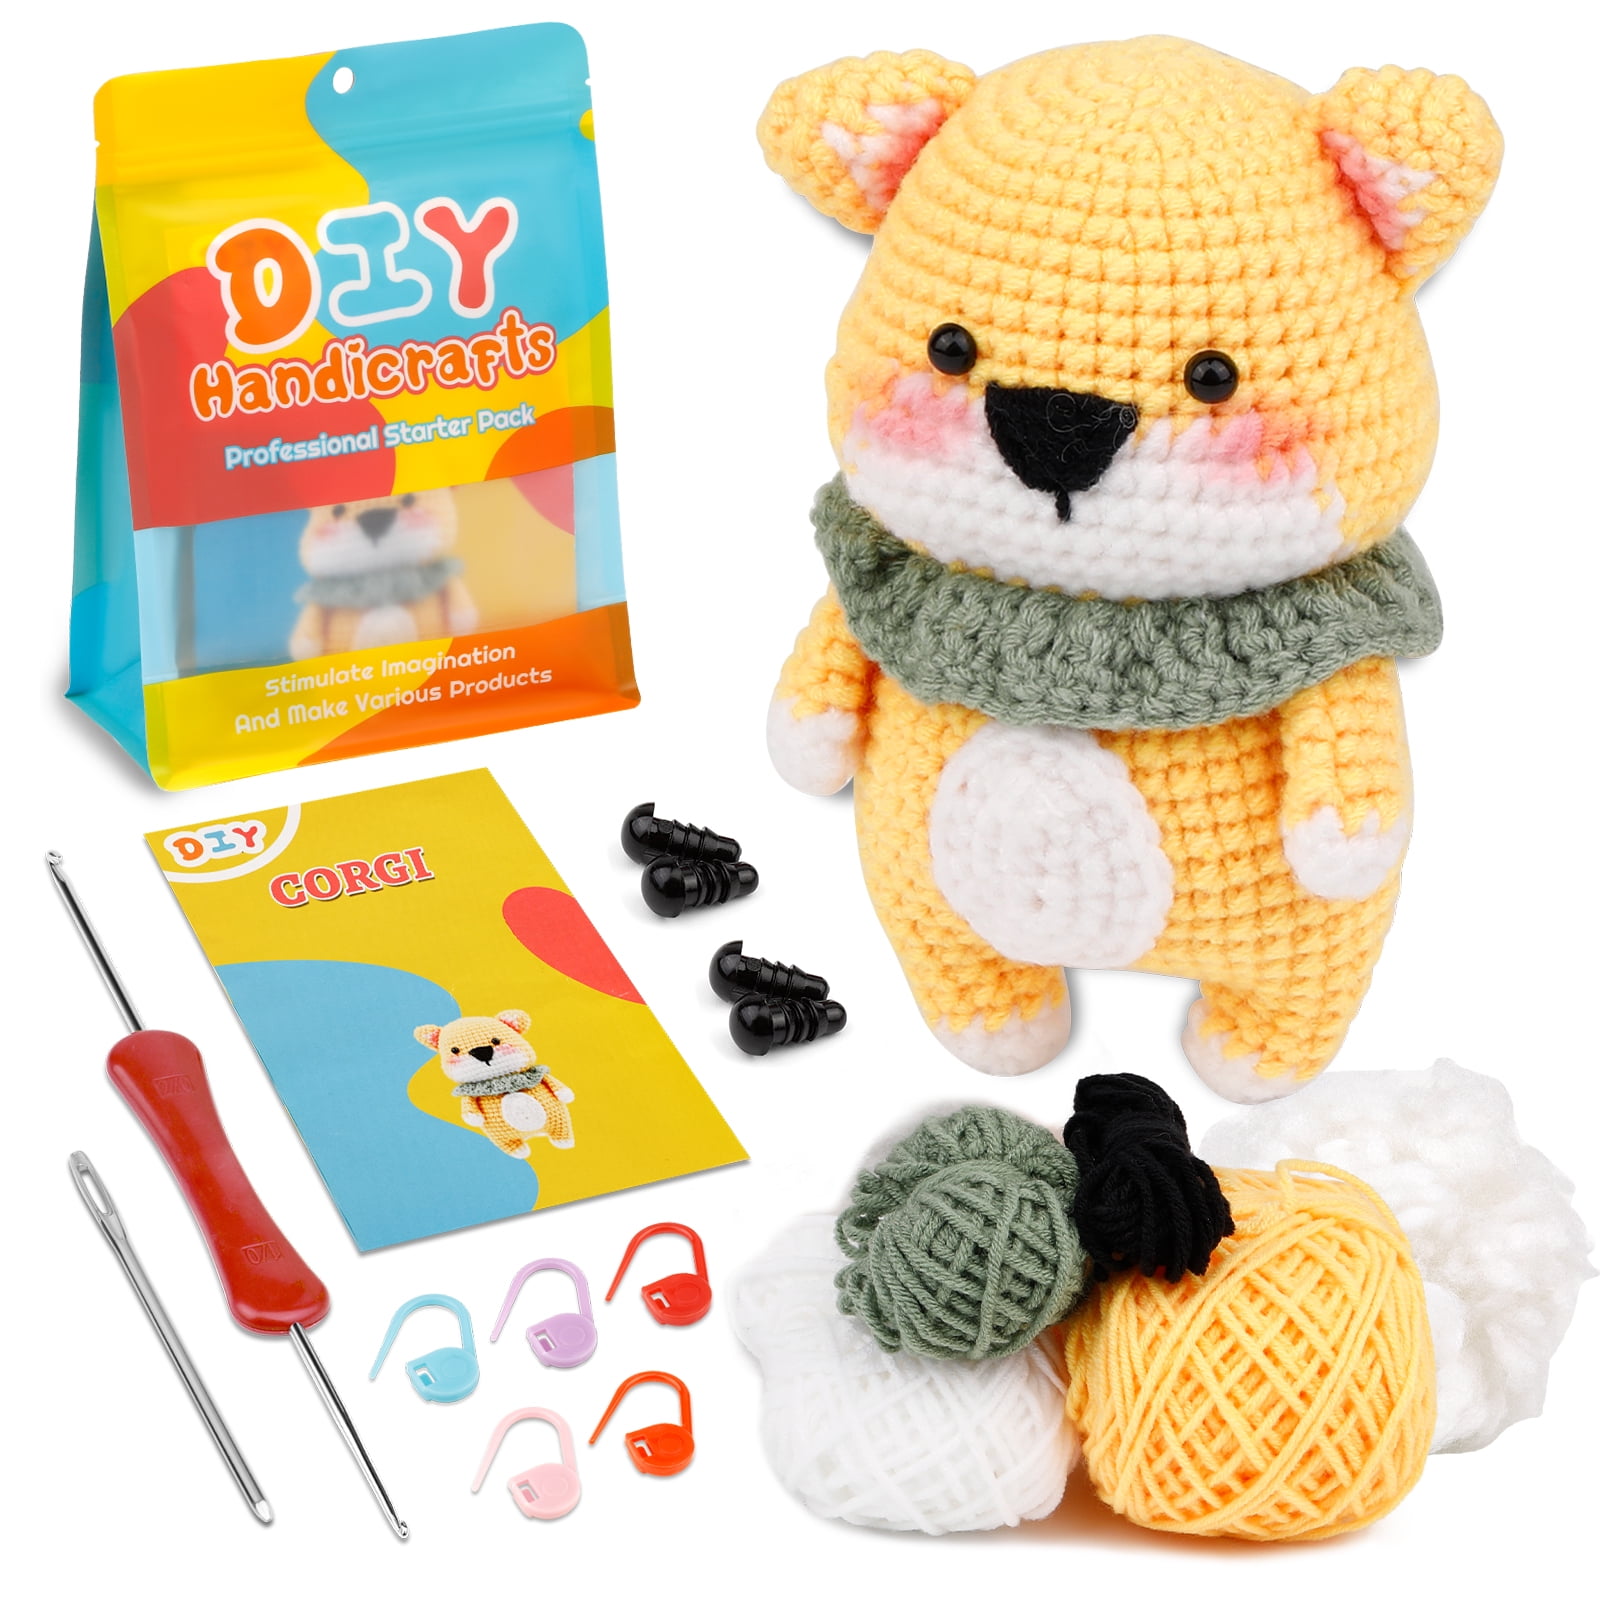 Beginners Crochet Kit, Cute Small Animals Kit for Beginers and Experts, All  in One Crochet Knitting Kit, Step-by-Step Instructions Video, Crochet  Starter Kit for Beginner DIY Craft Art (Puppy). 